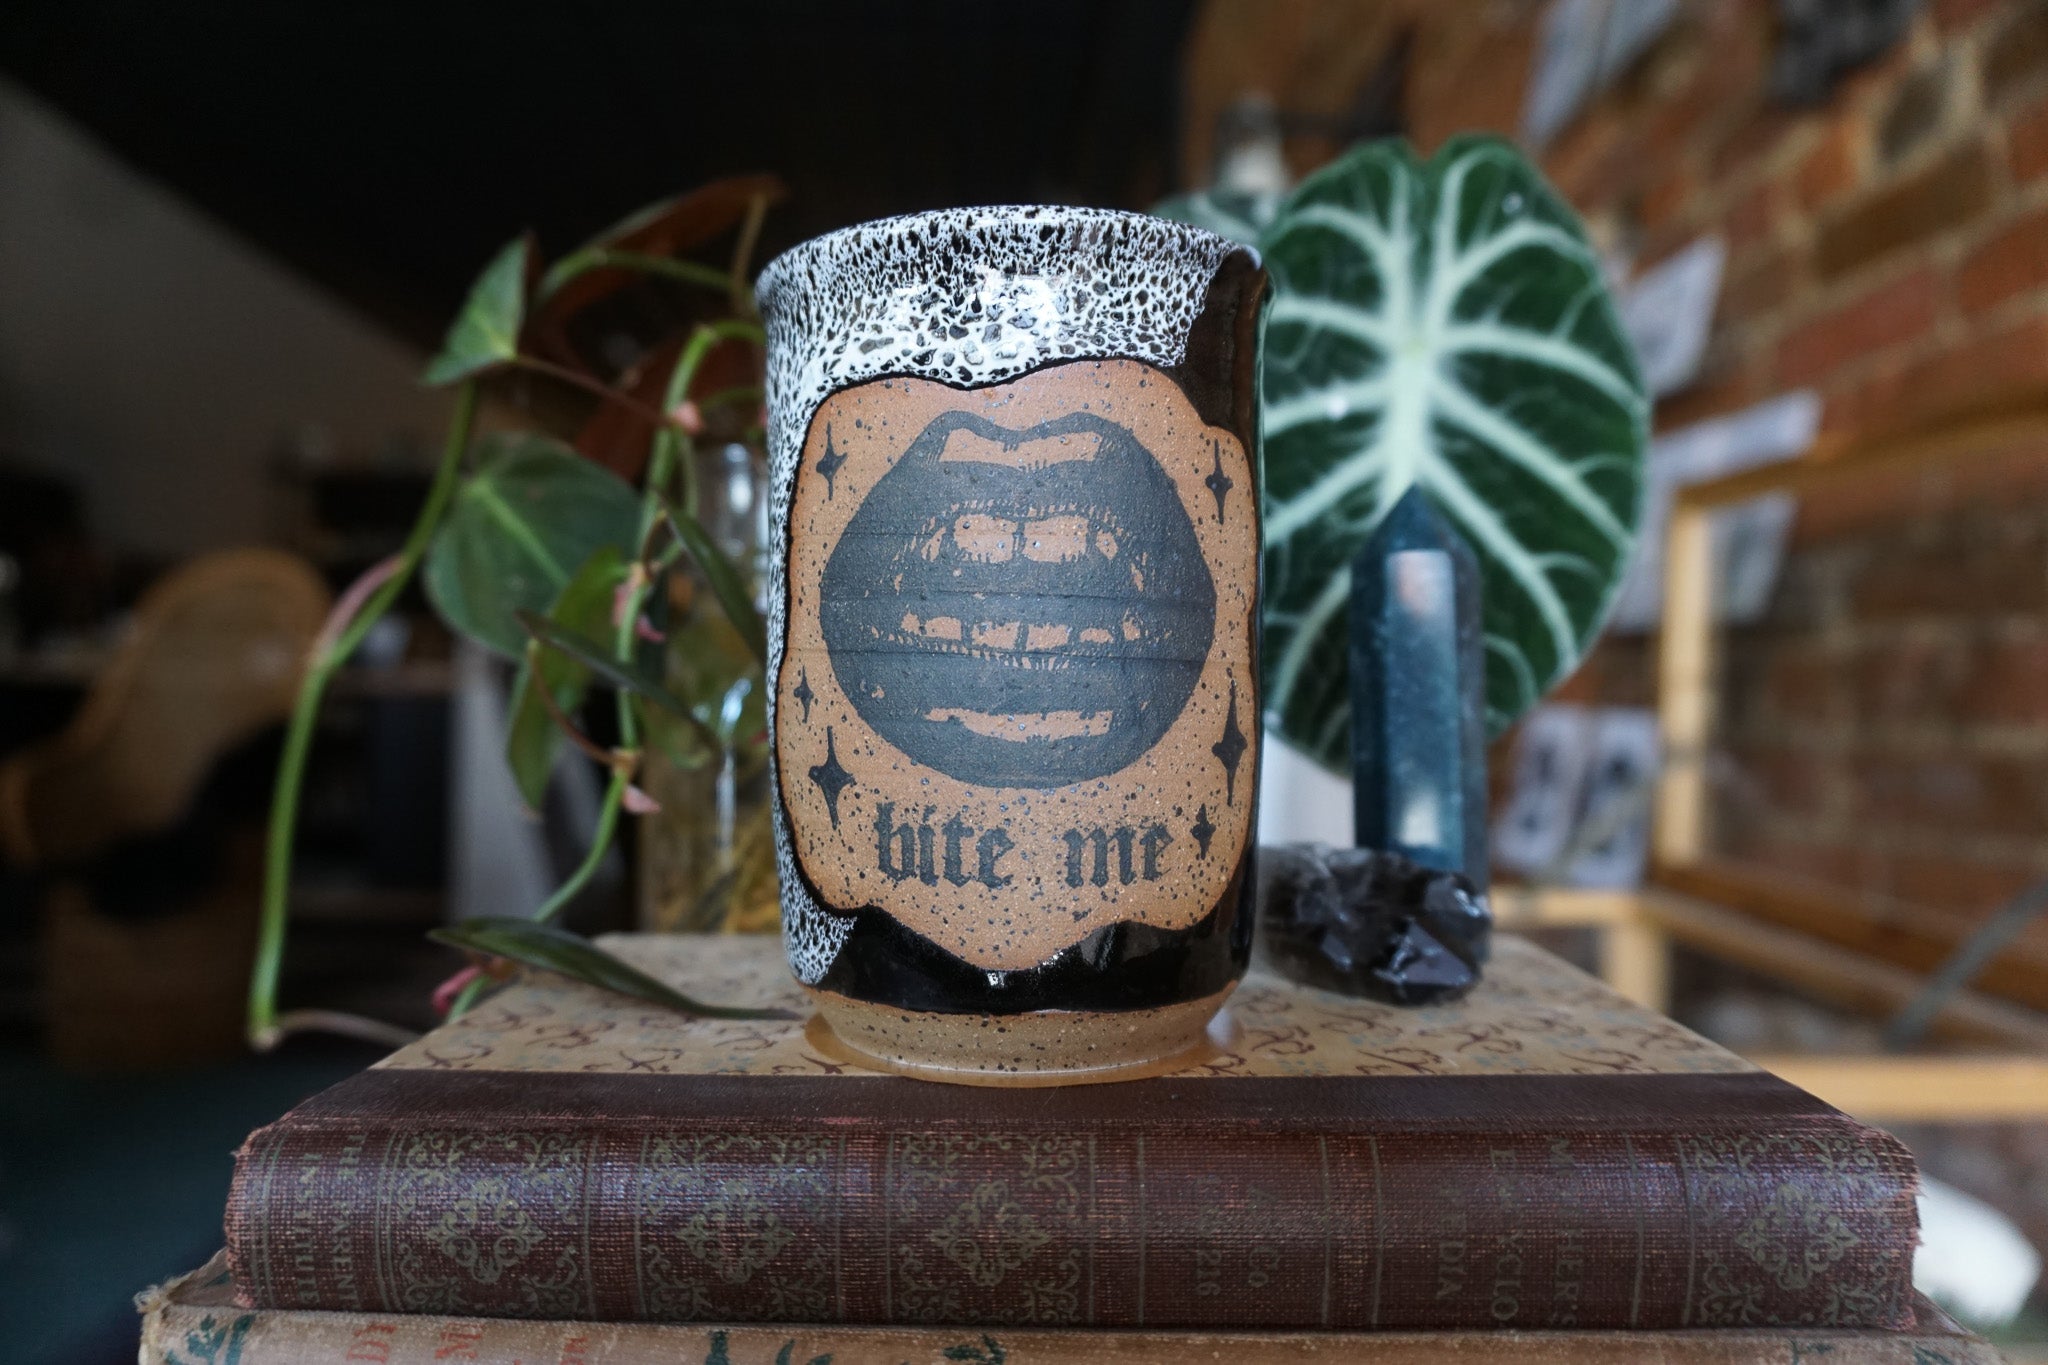 10oz "Bite Me" Candle in "Summer Solstice" Scent